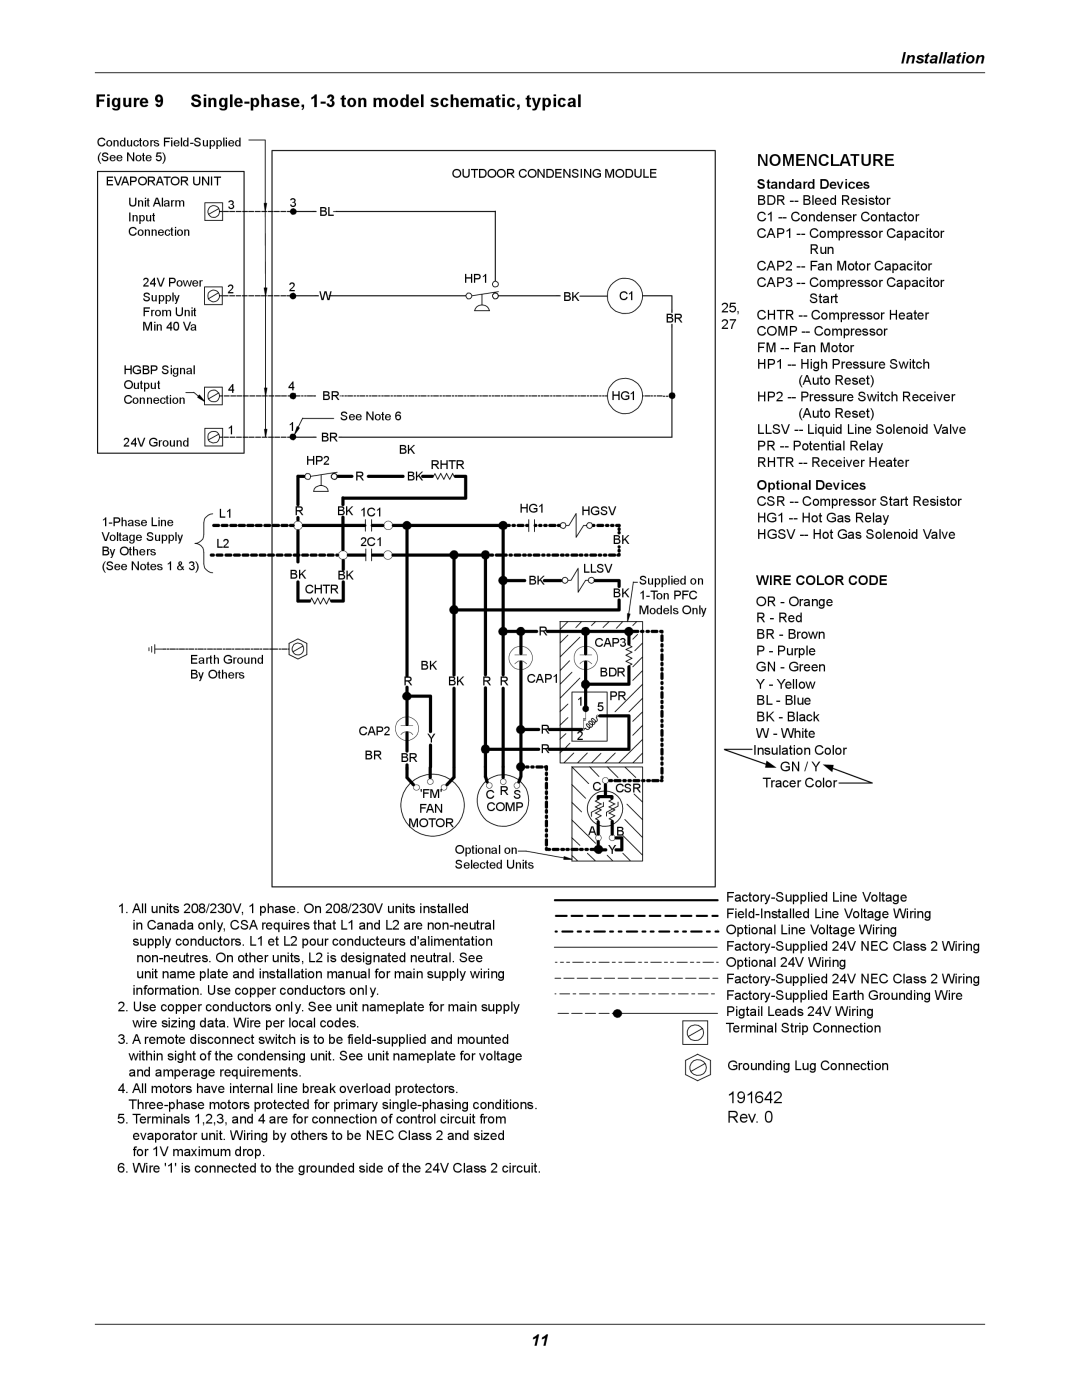 Emerson Figure i manual Installation, Nomenclature, Standard Devices, Optional Devices, Wire Color Code 